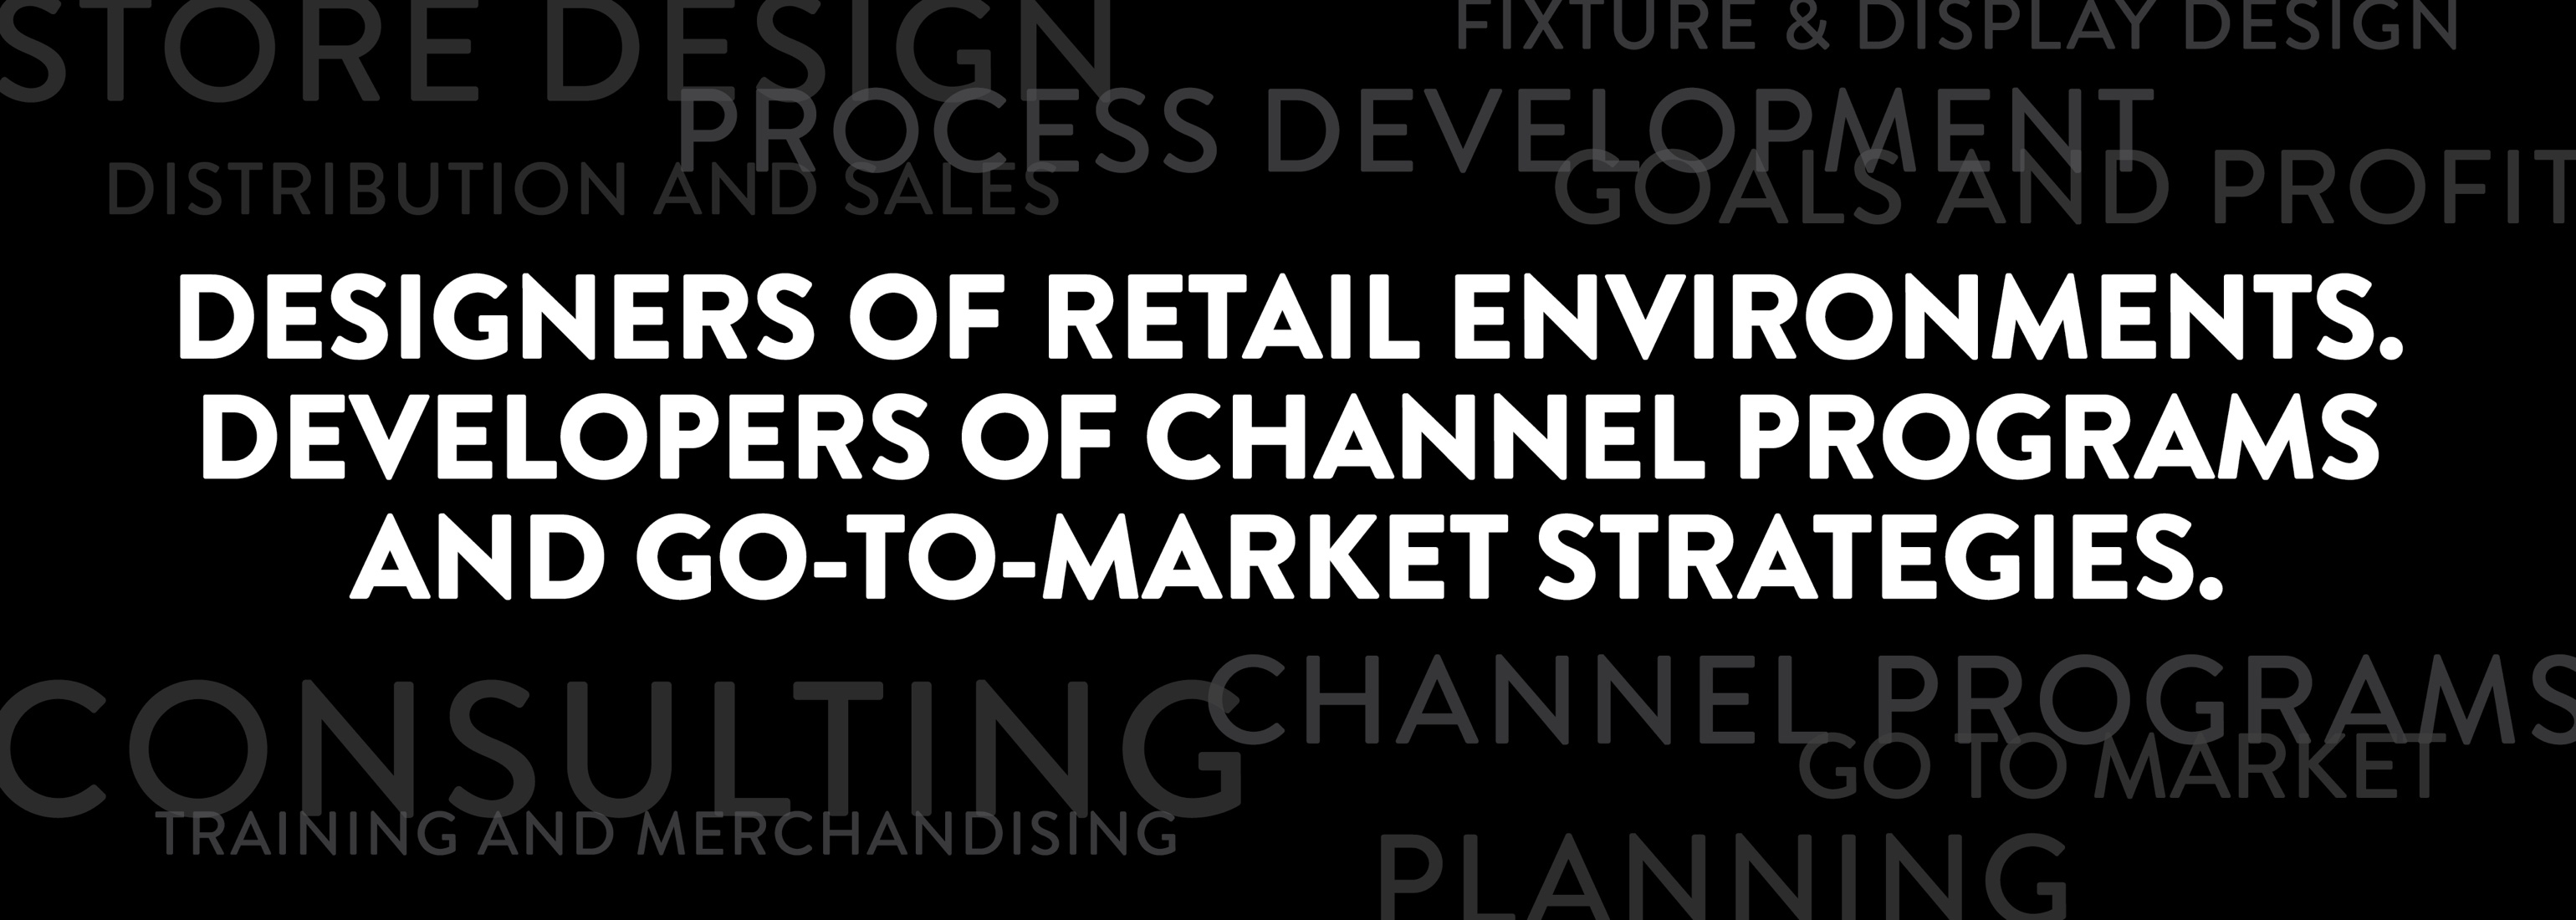 <h1>Designers of retail environments, Developers of channel programs and go-to-market strategies.</h1>